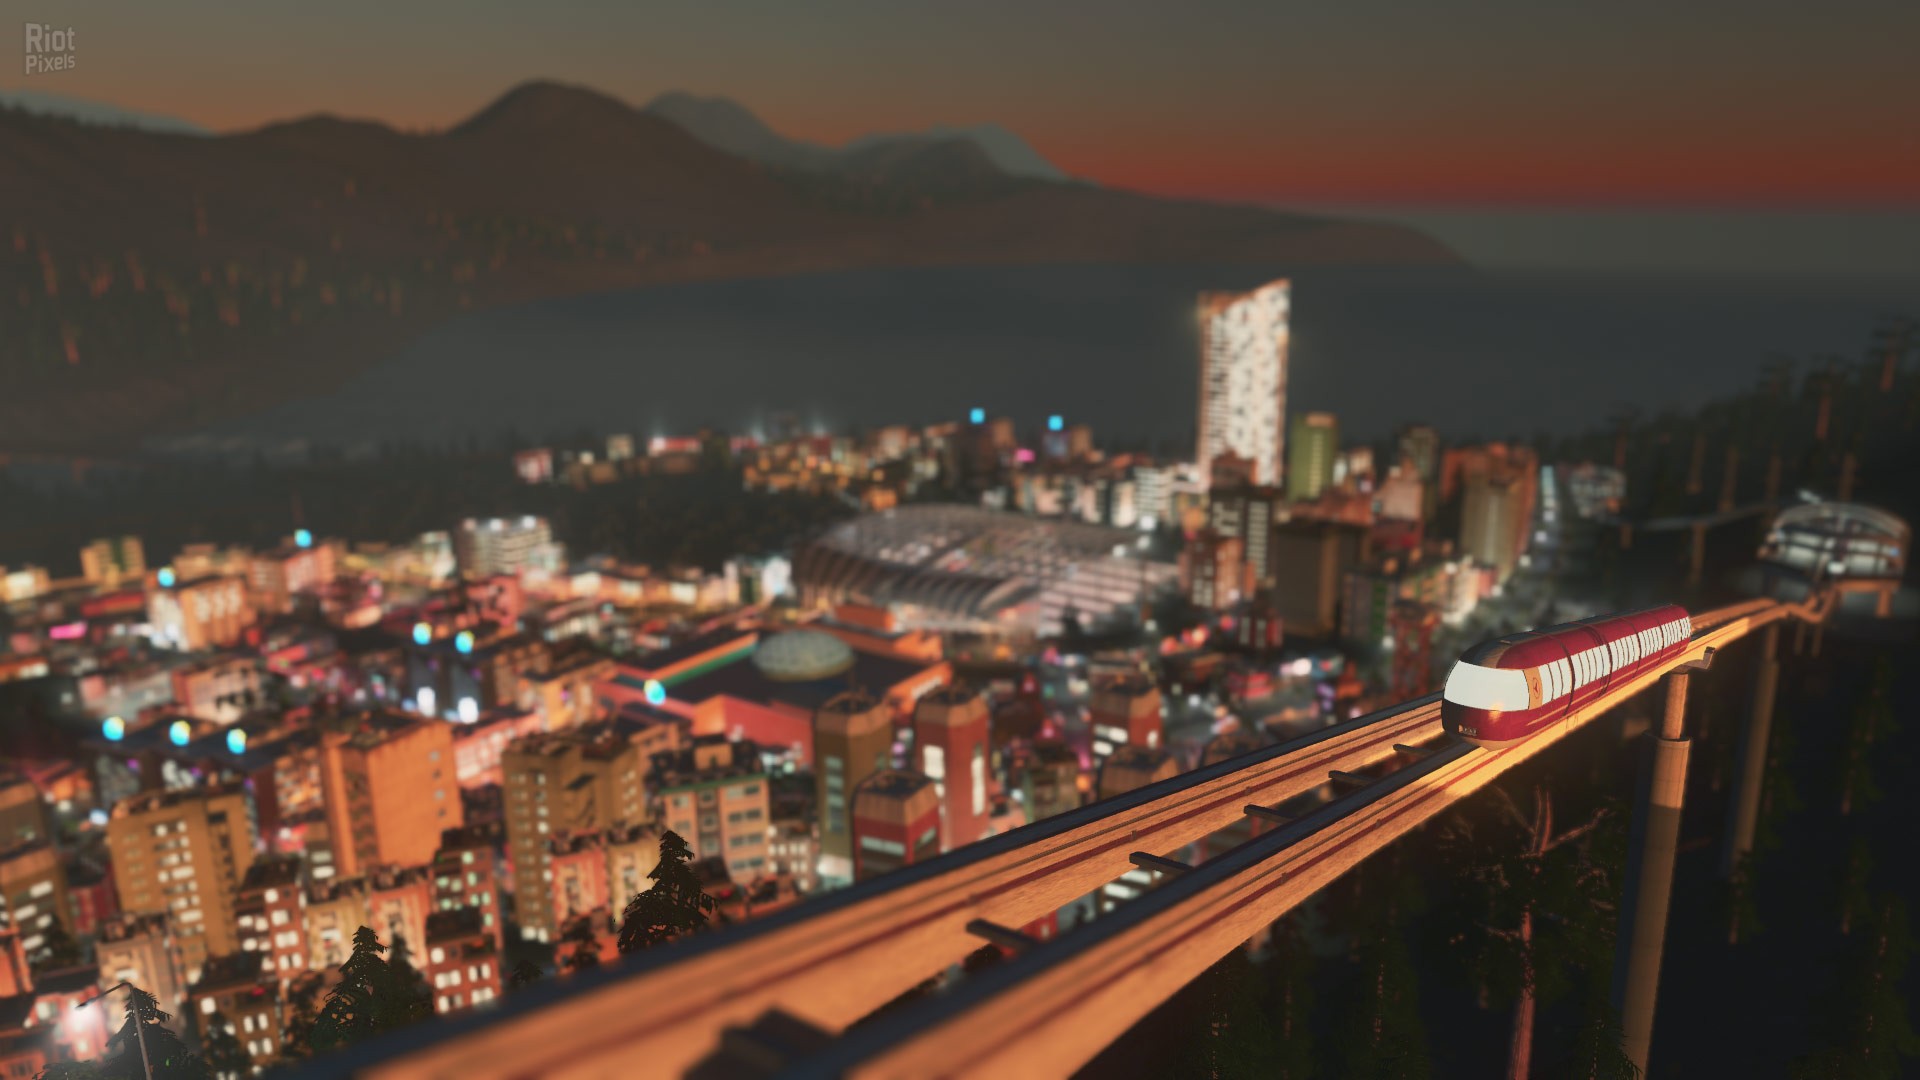 cities skylines all dlc torrent fitgirl